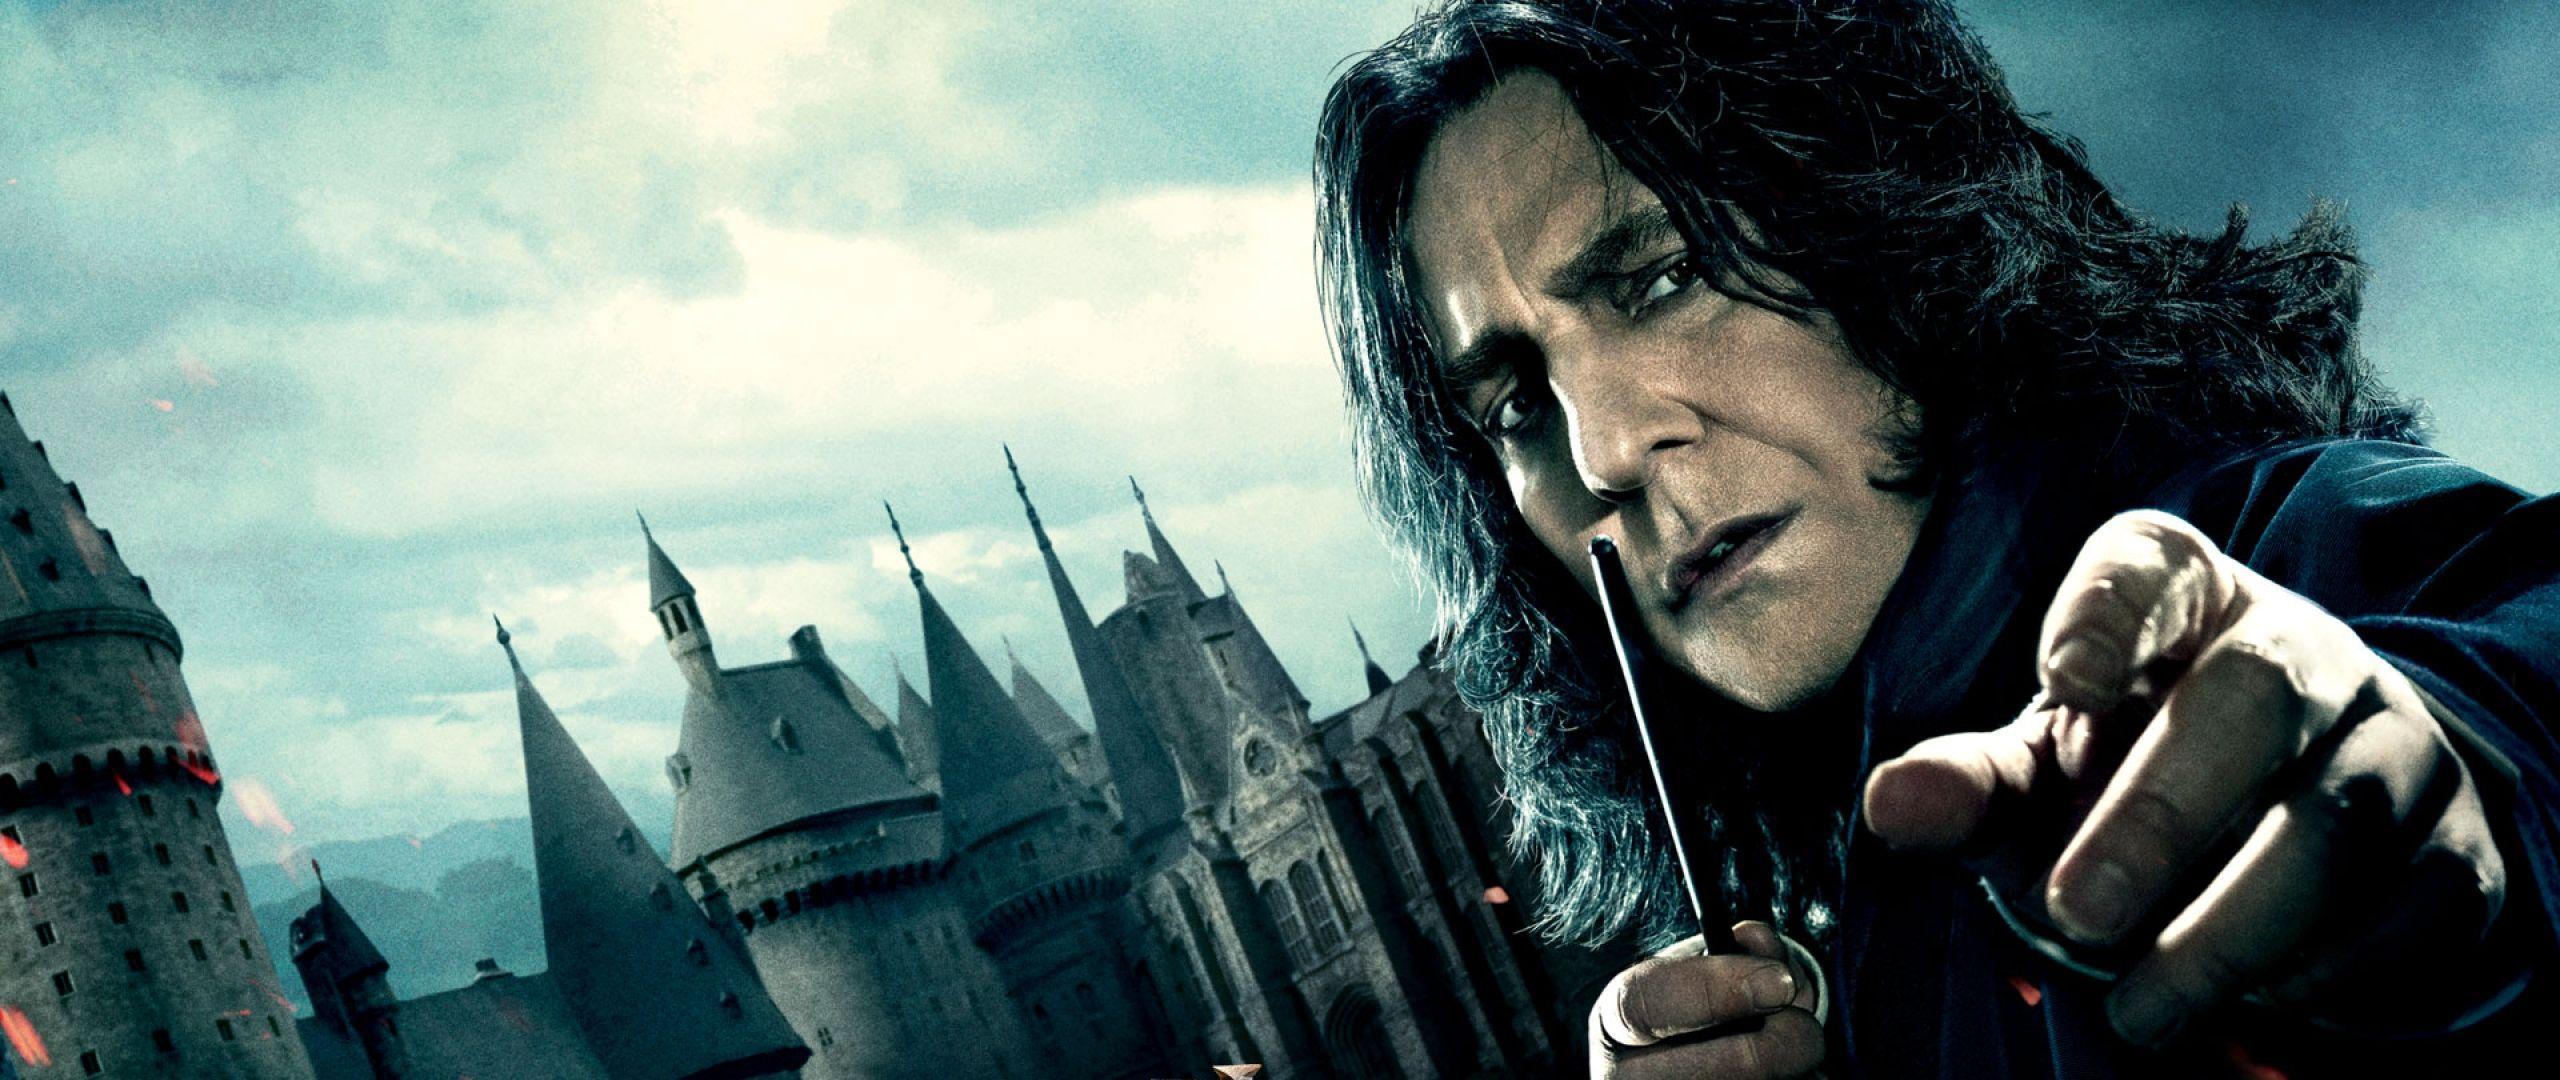 Download Wallpaper 2560x1080 Harry potter and the deathly hallows